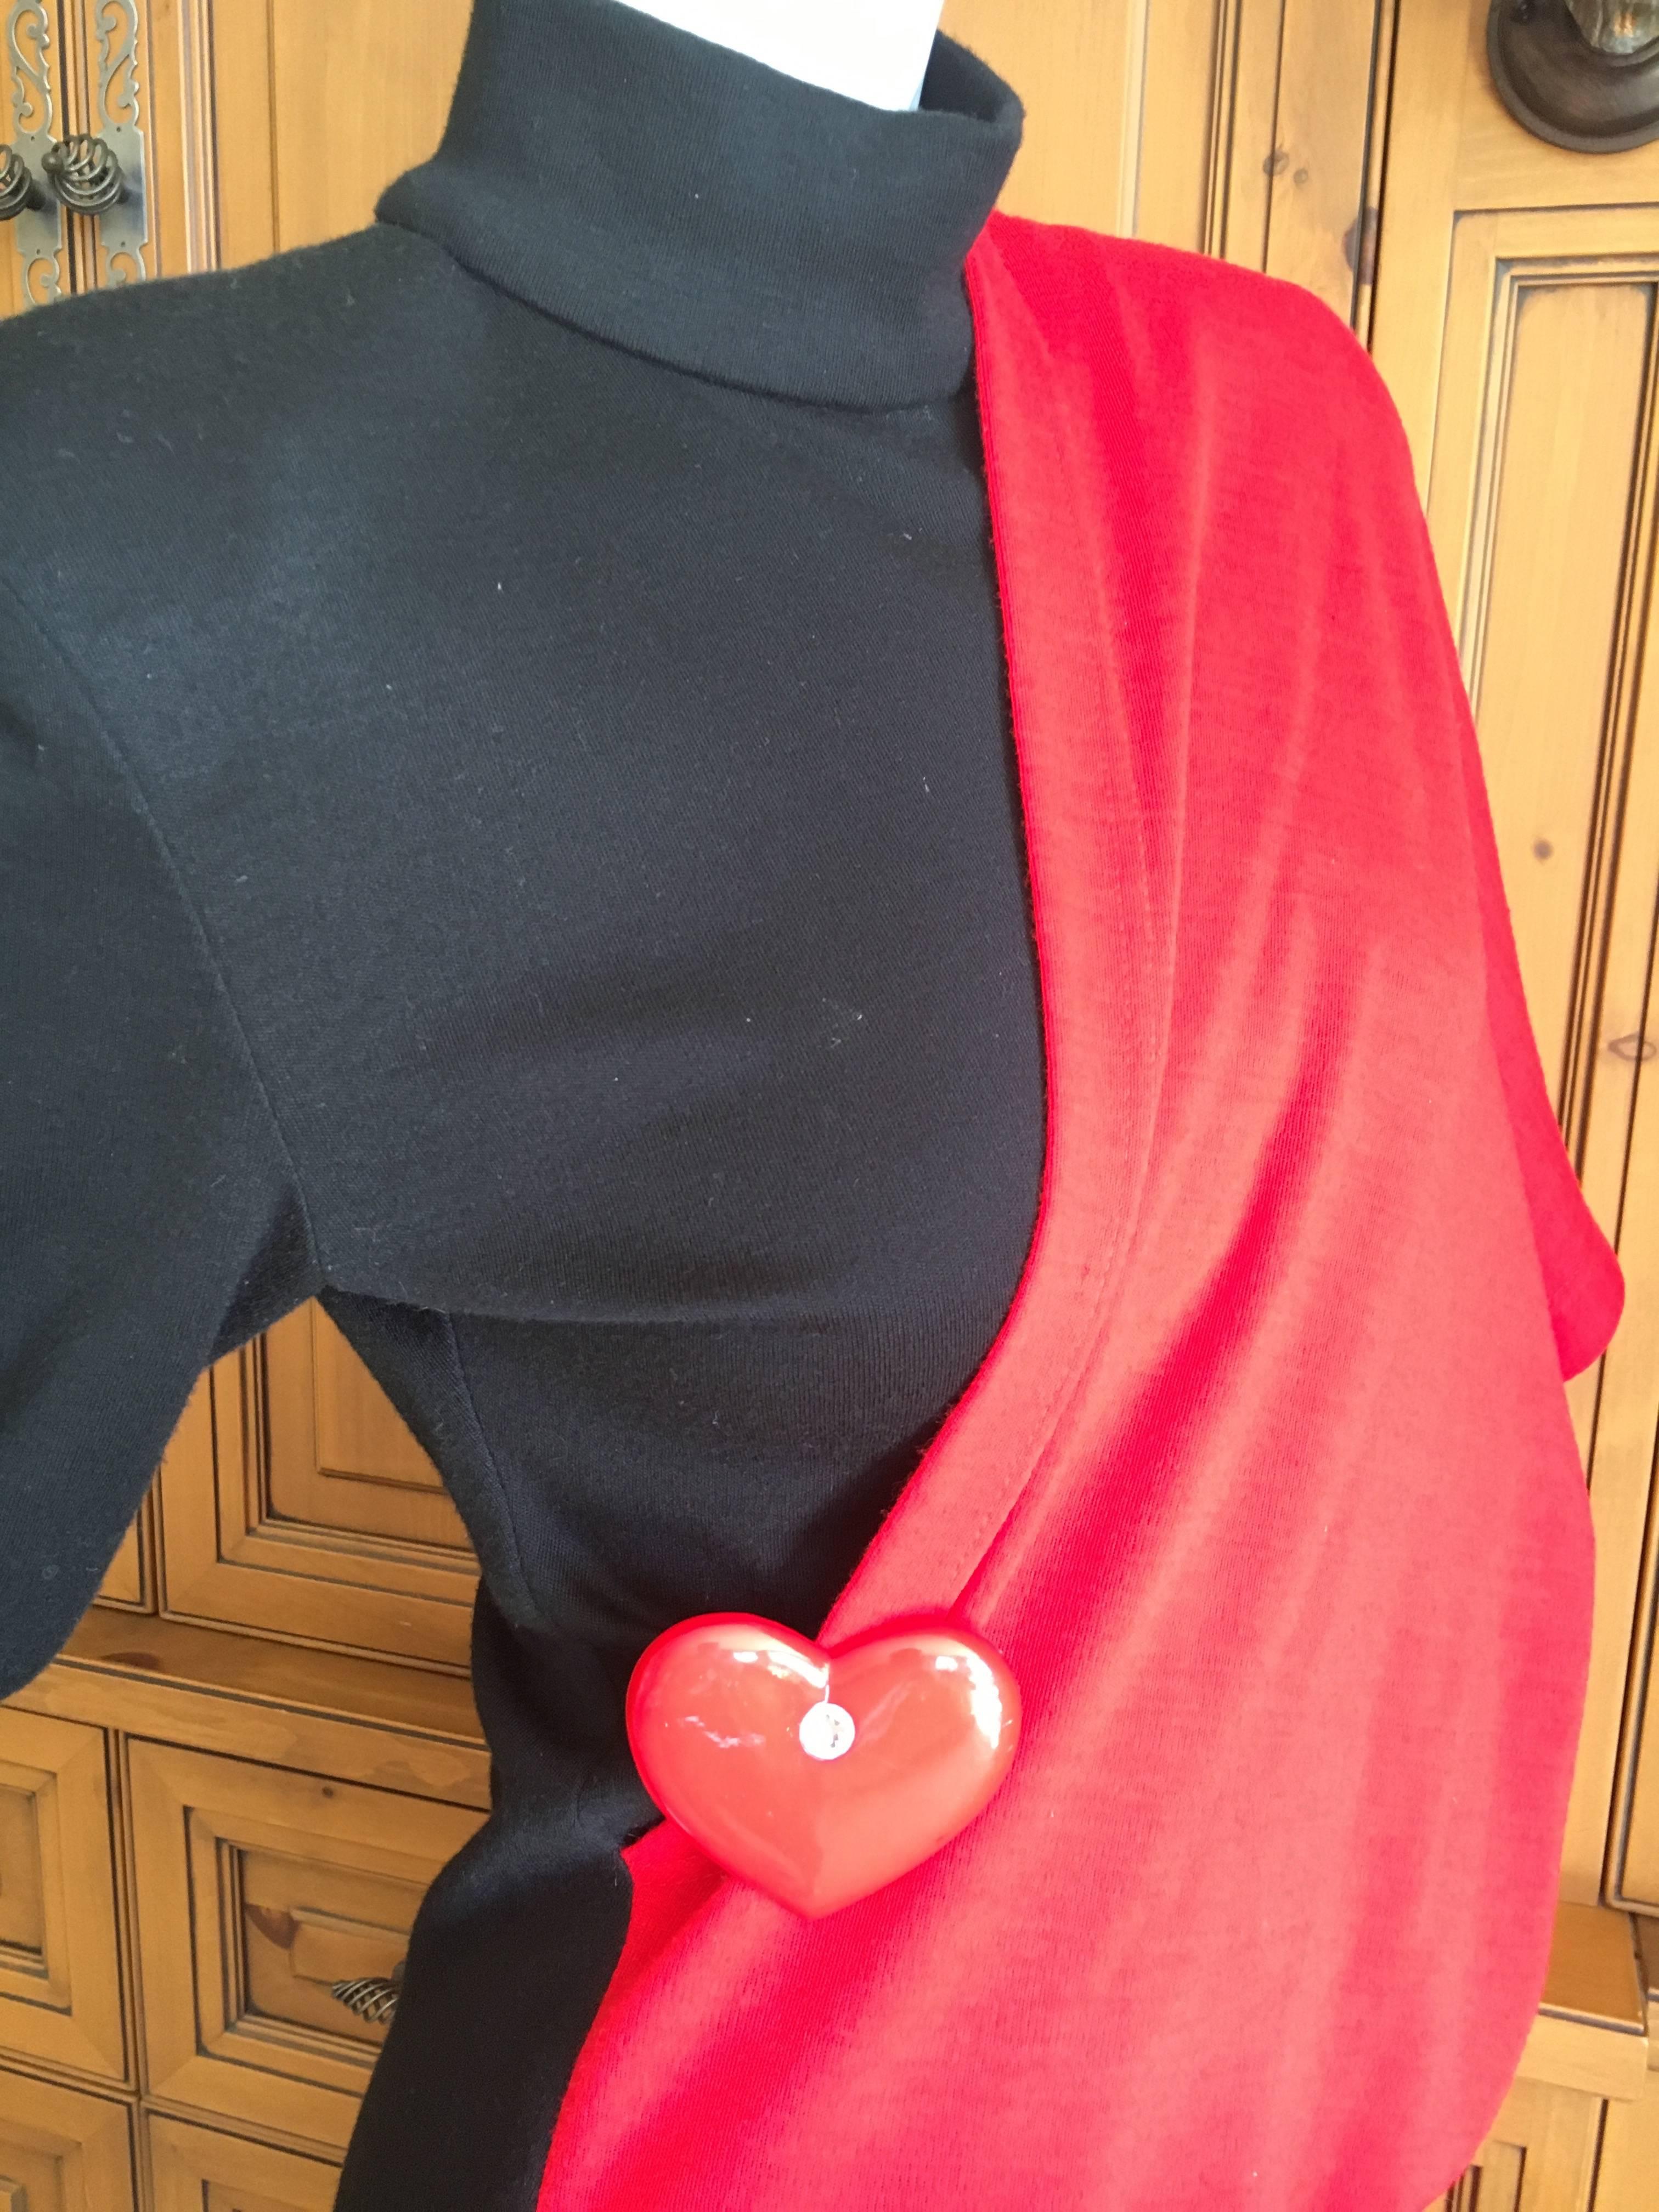 Patrick Kelly Paris Vintage Black Dress with Heart Charm and Red Sash Cape For Sale 2